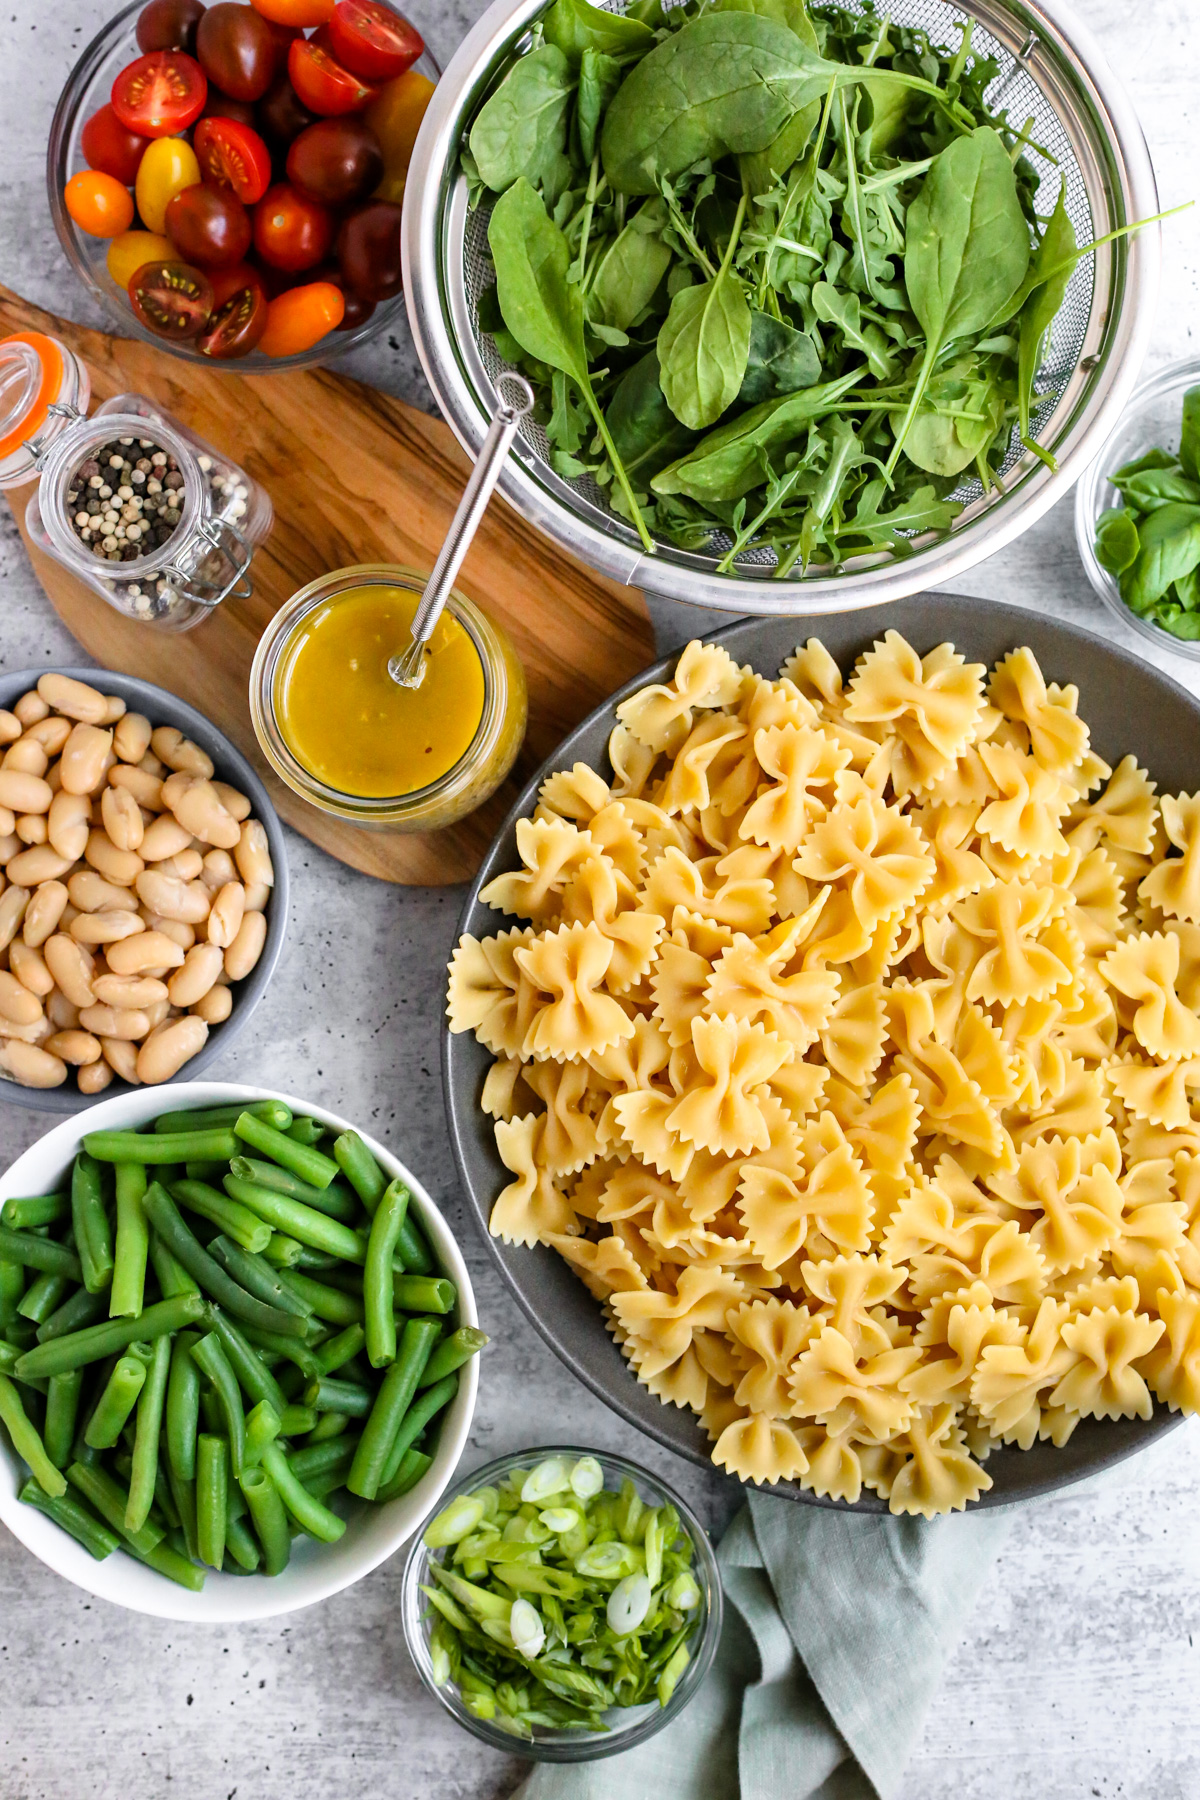 Flatlay style image of the ingredients needed for a beans and greens pasta salad, including cooked bowtie pasta, sliced green onions and cherry tomatoes, blanched and trimmed green beans, canned cannellini beans, fresh salad greens and basil, and a homemade red wine vinaigrette dressing